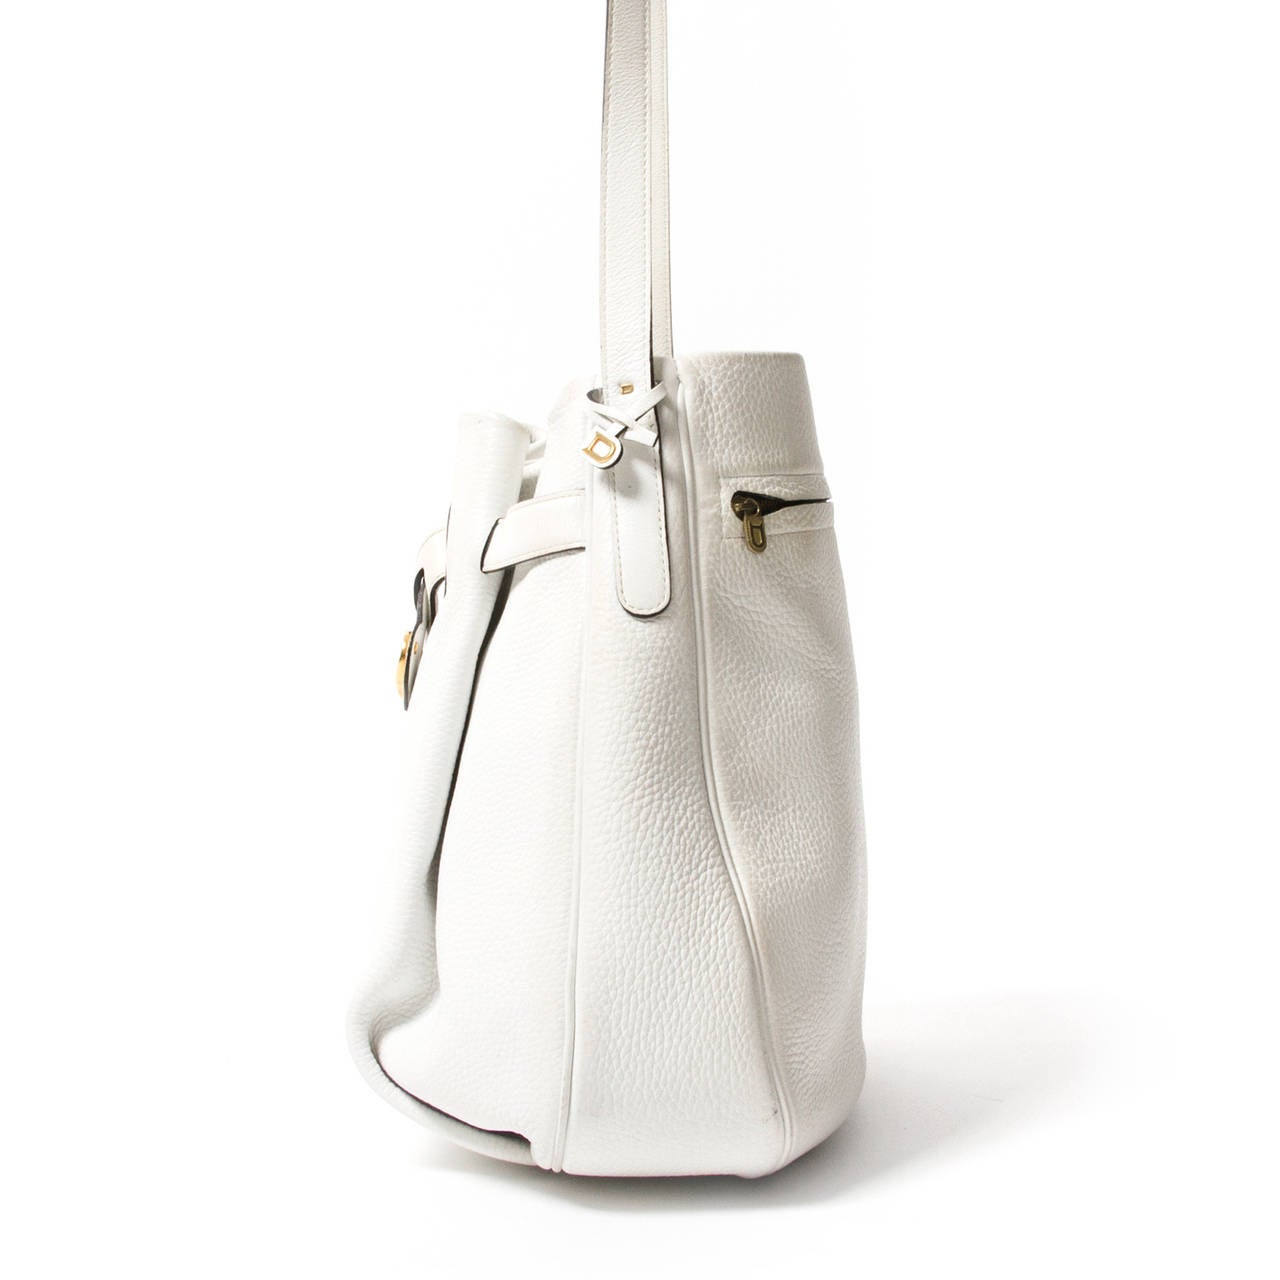 Delvaux shoulder bag in a white leather. Adjustable leather strap to wear this bag cross-body. Iconic D strap on the front. Large zipper compartment on the back to store some small items. Magnetic top closure and a beautiful cognac suede lining.